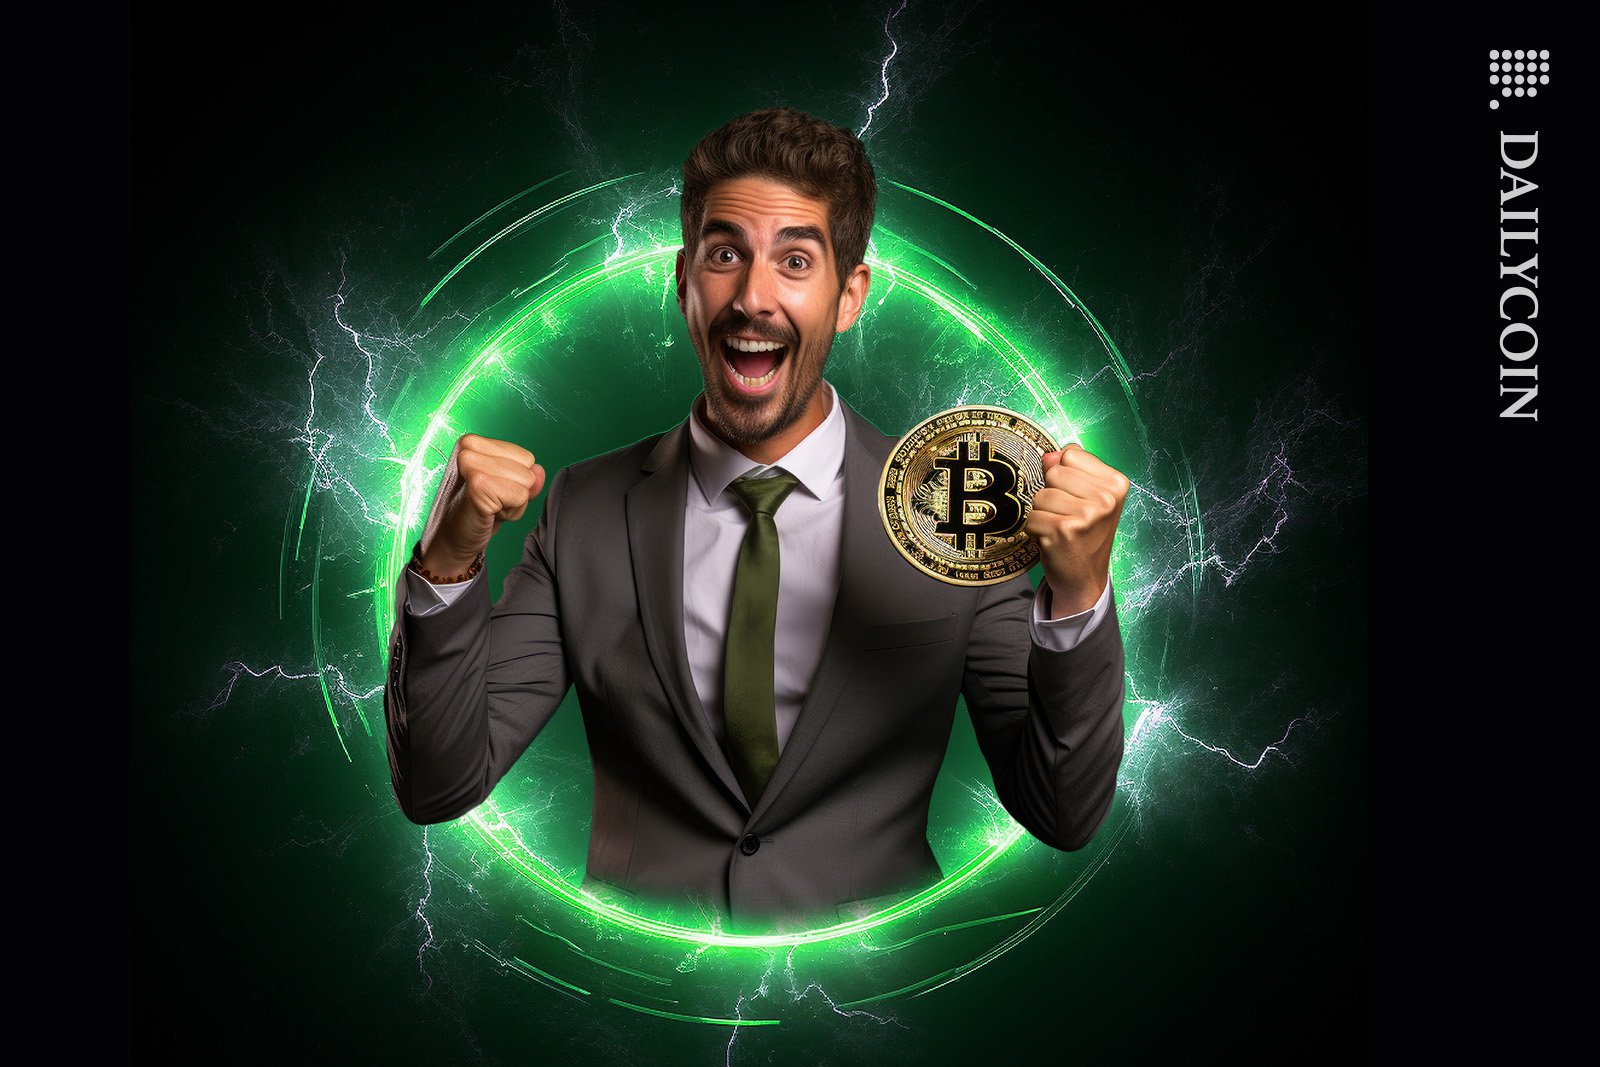 Man super excited about Bitcoin.